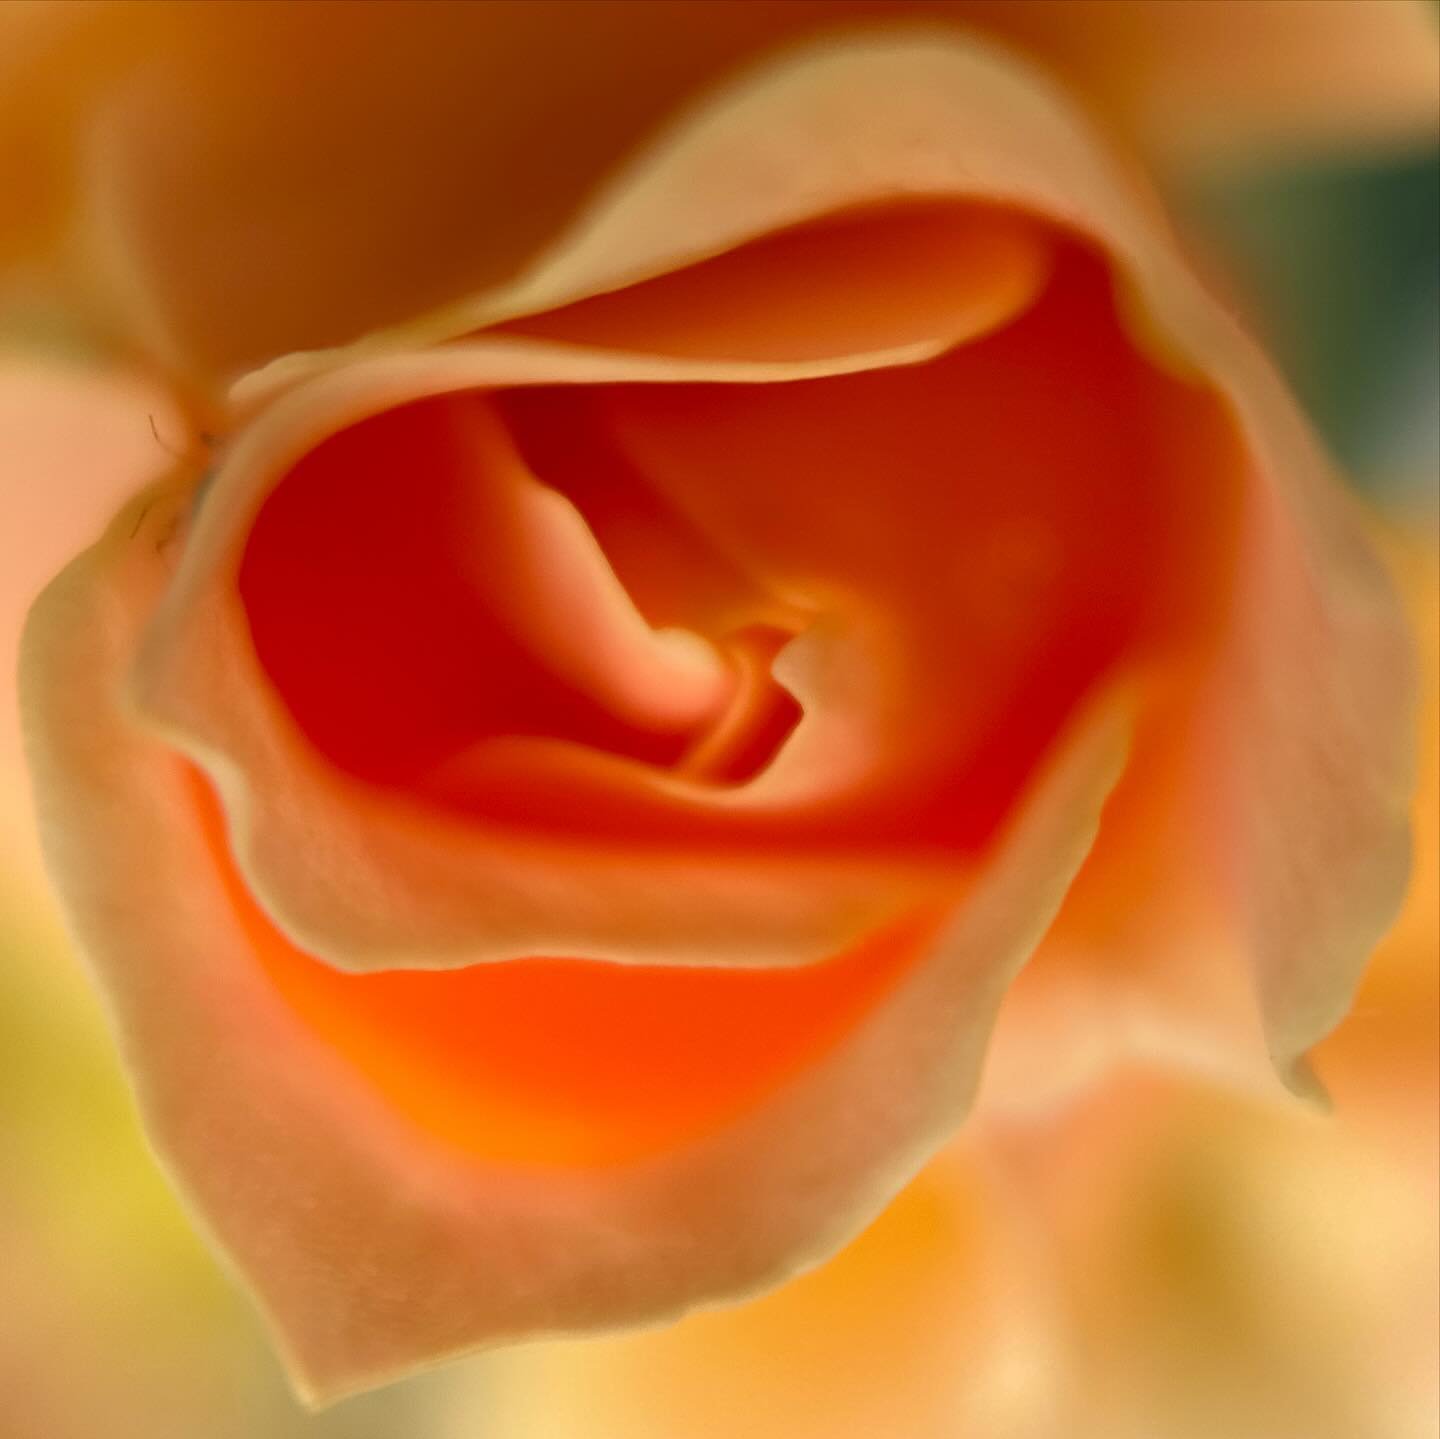 Shifting a bit deeper within an orange rose ~